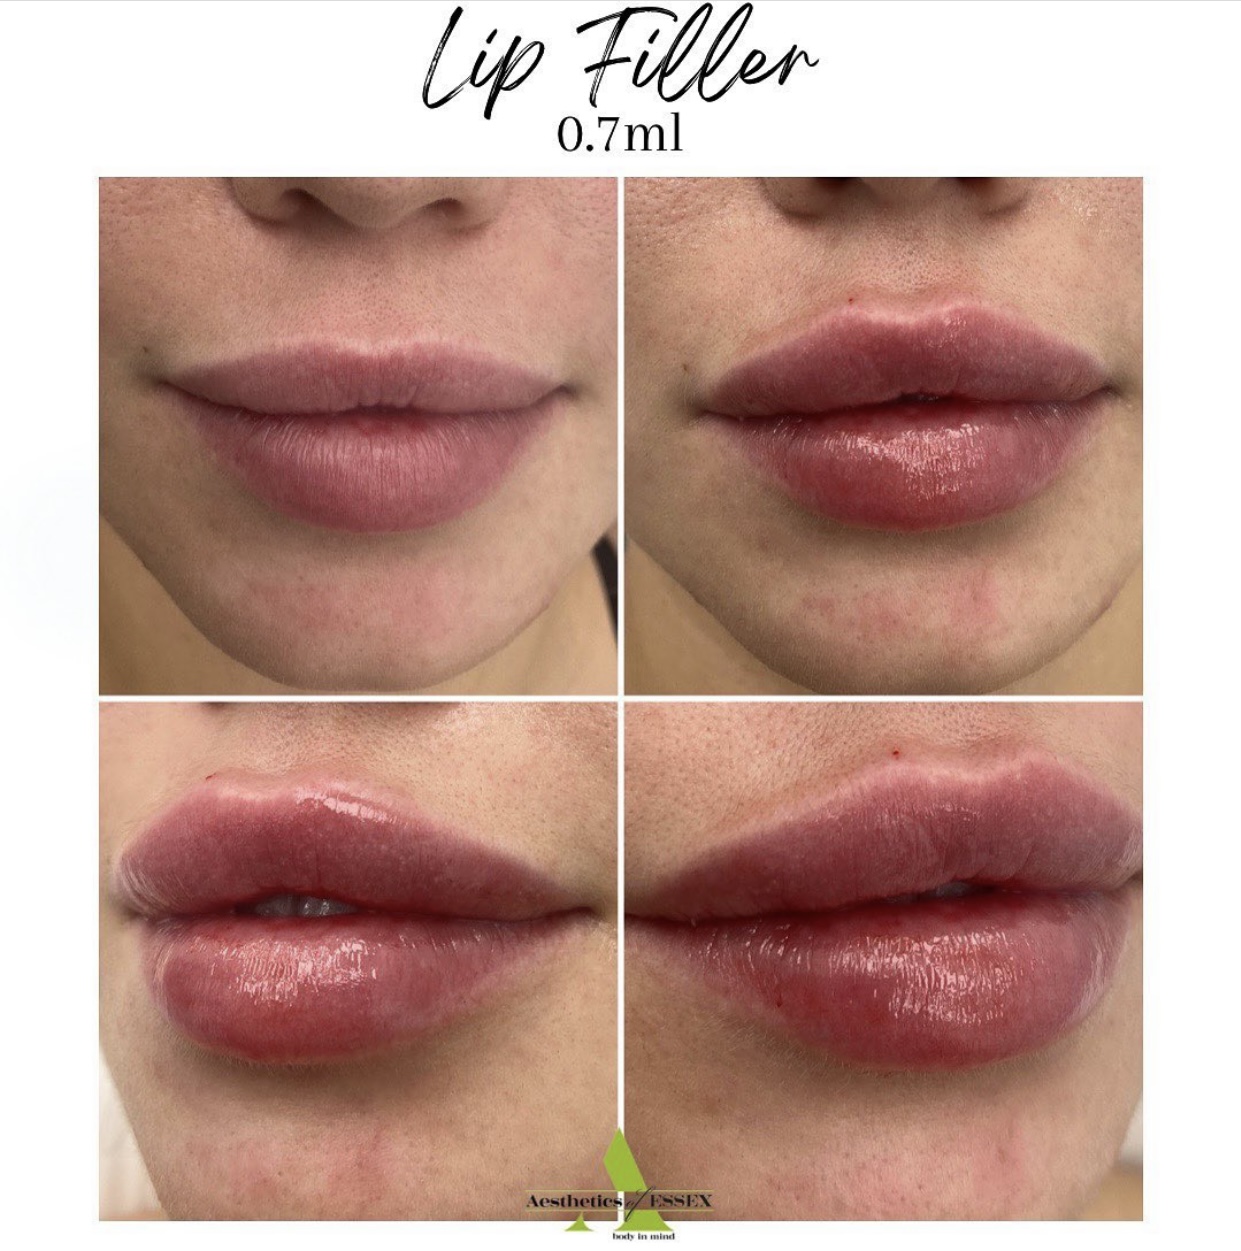 Before and after treatment lip filler